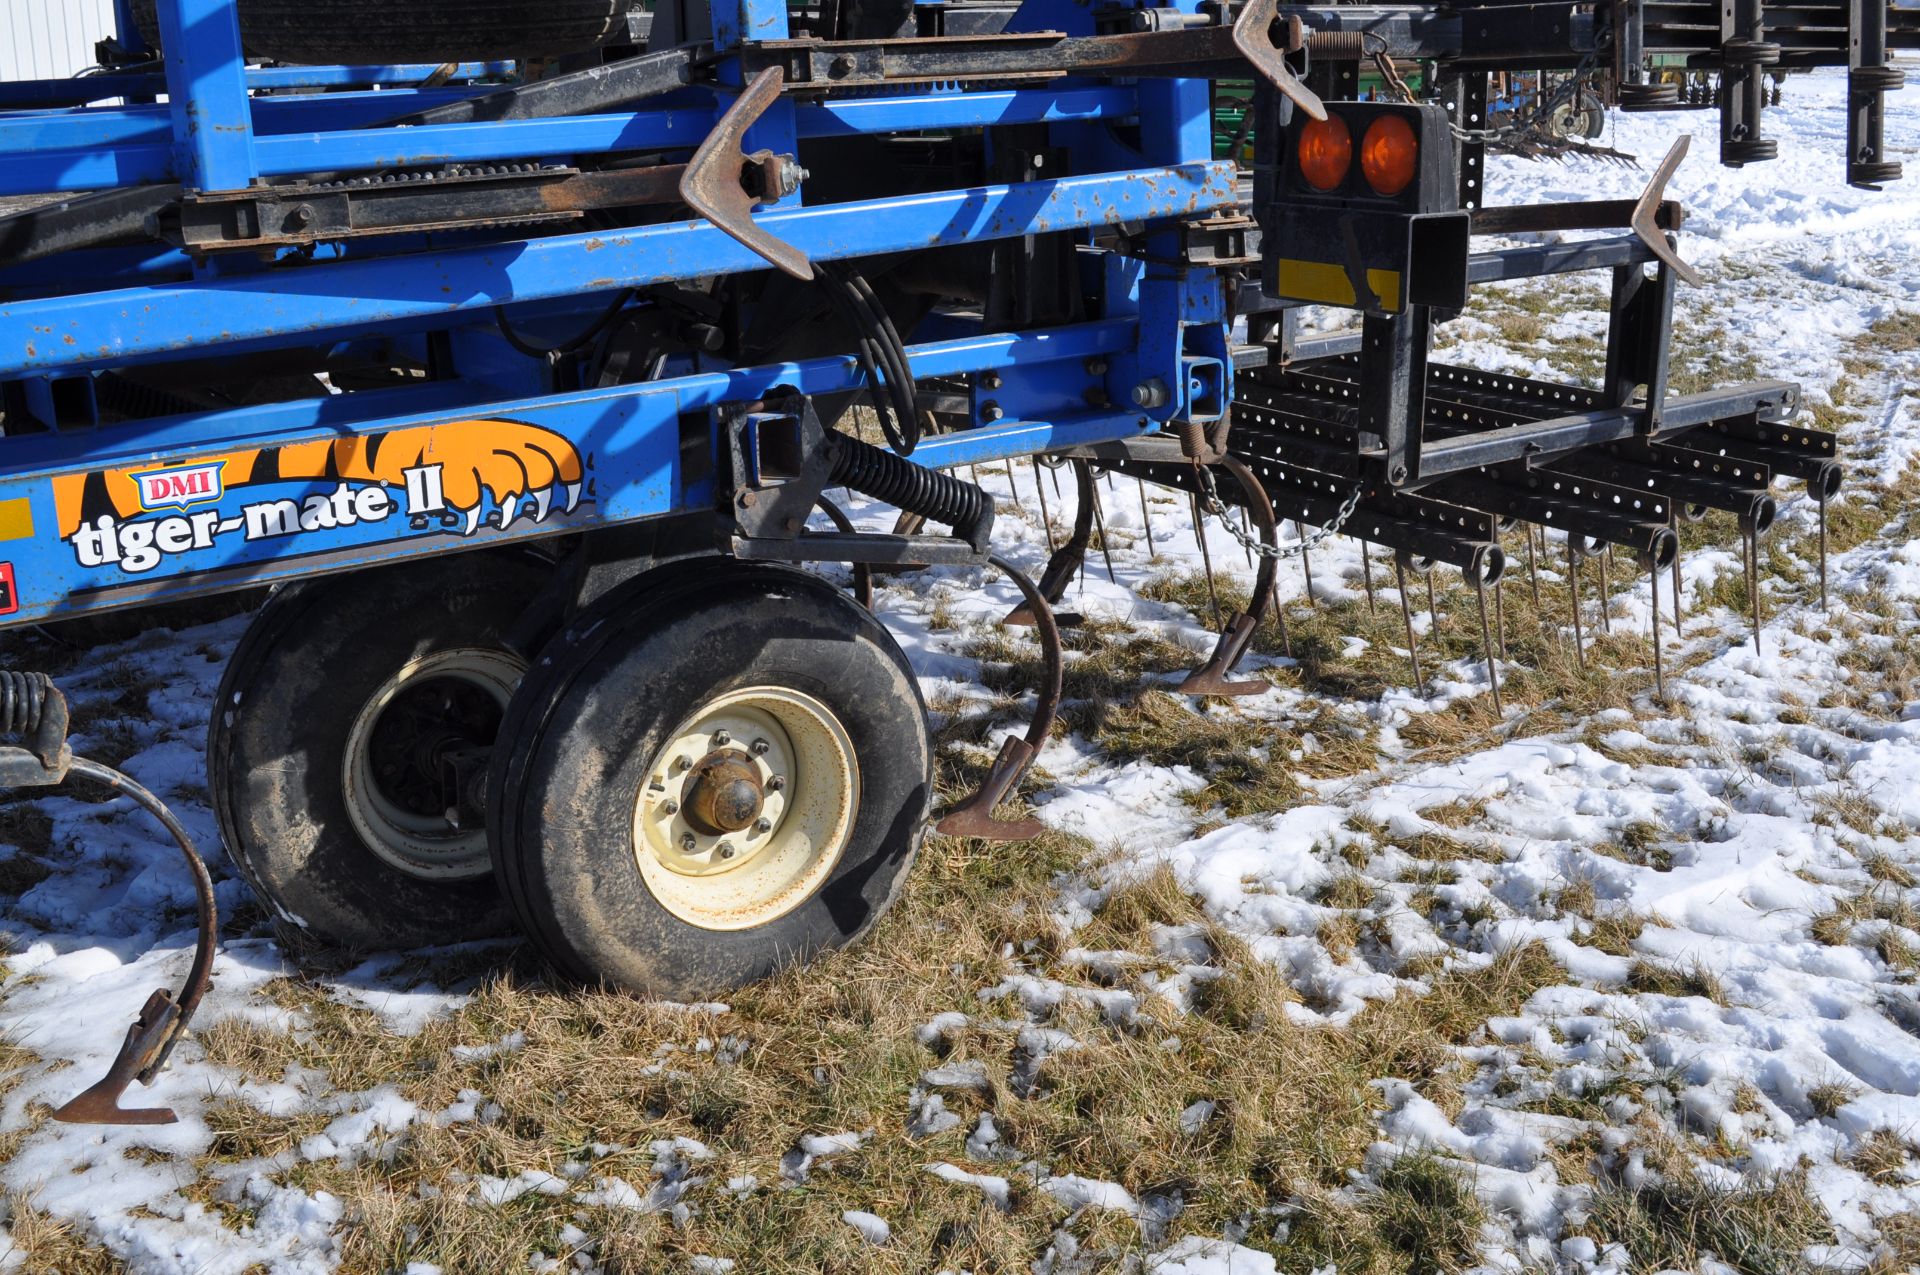 41’ DMI Tiger Mate II field cultivator, dble hyd fold, walking tandems, rear hitch, 4 bar spring - Image 10 of 21